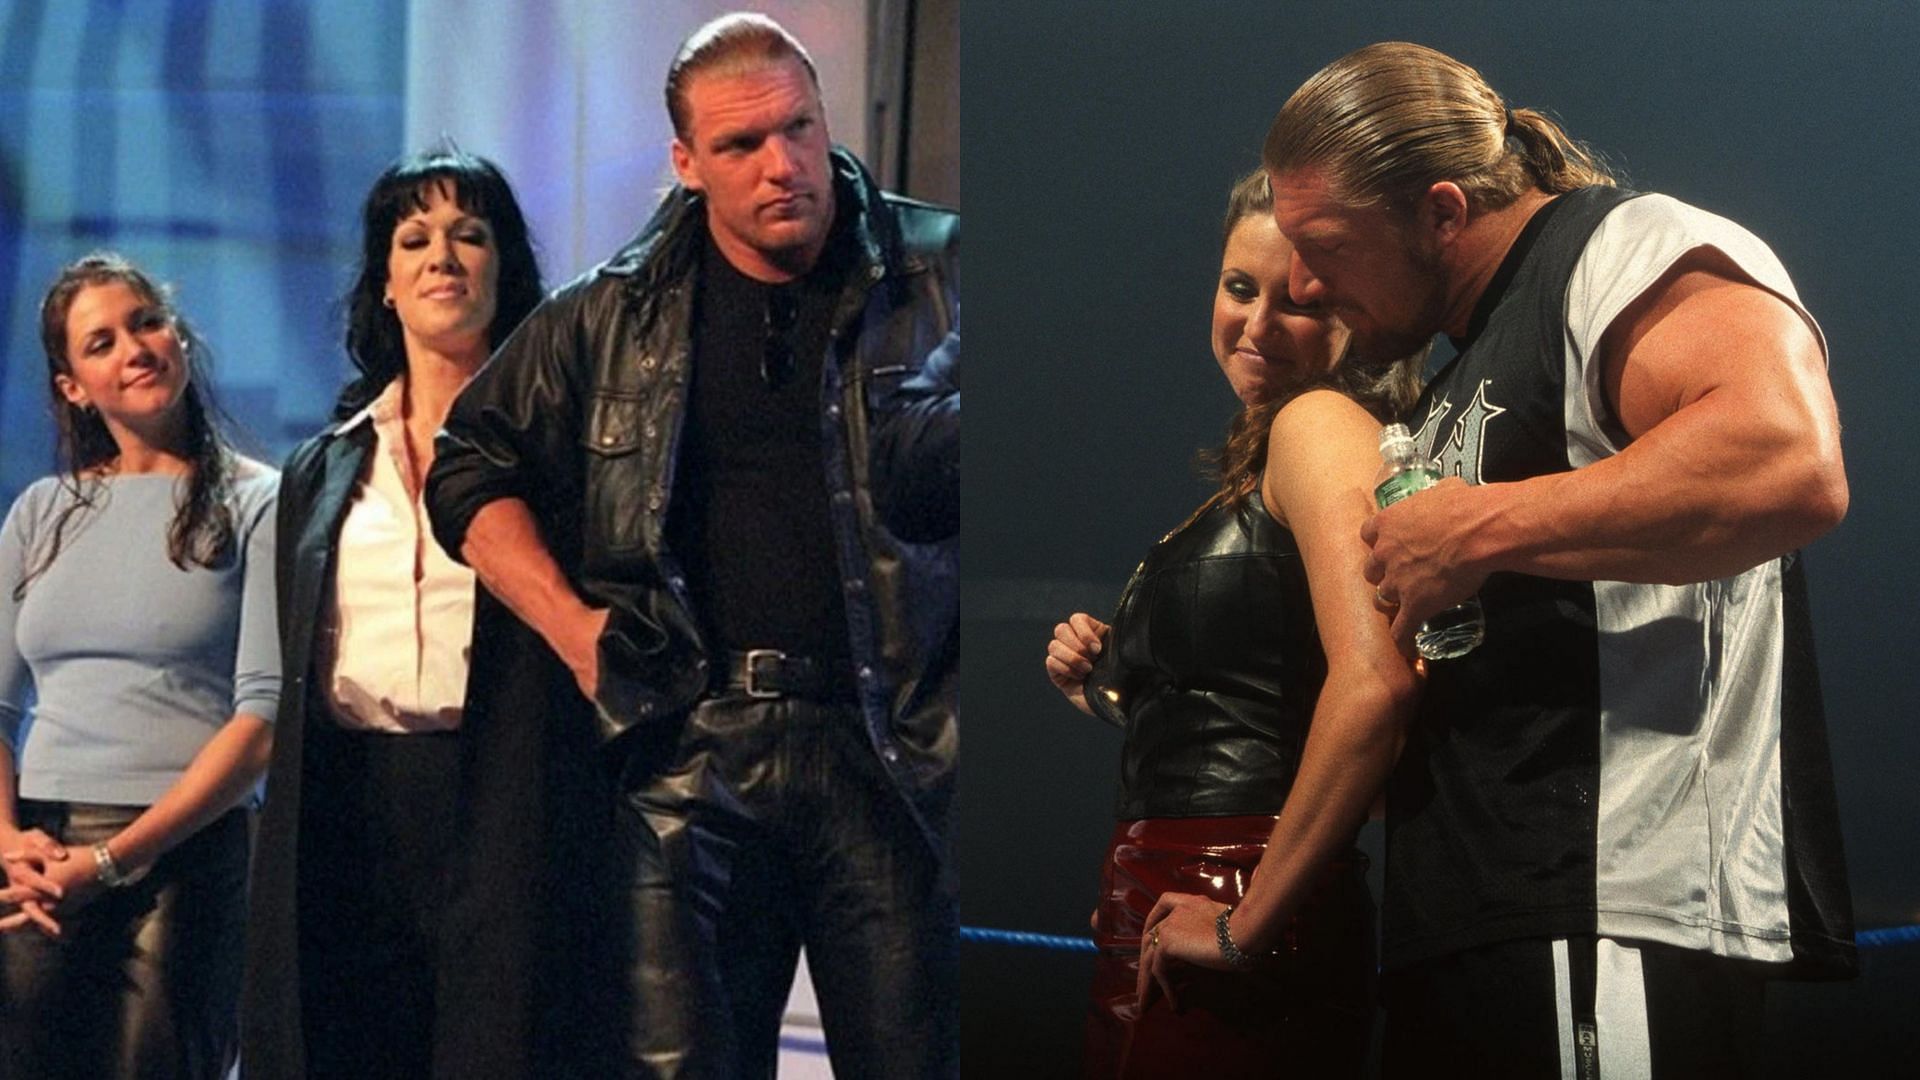 WWE CCO Triple H was in a relationship with Chyna before dating Stephanie McMahon